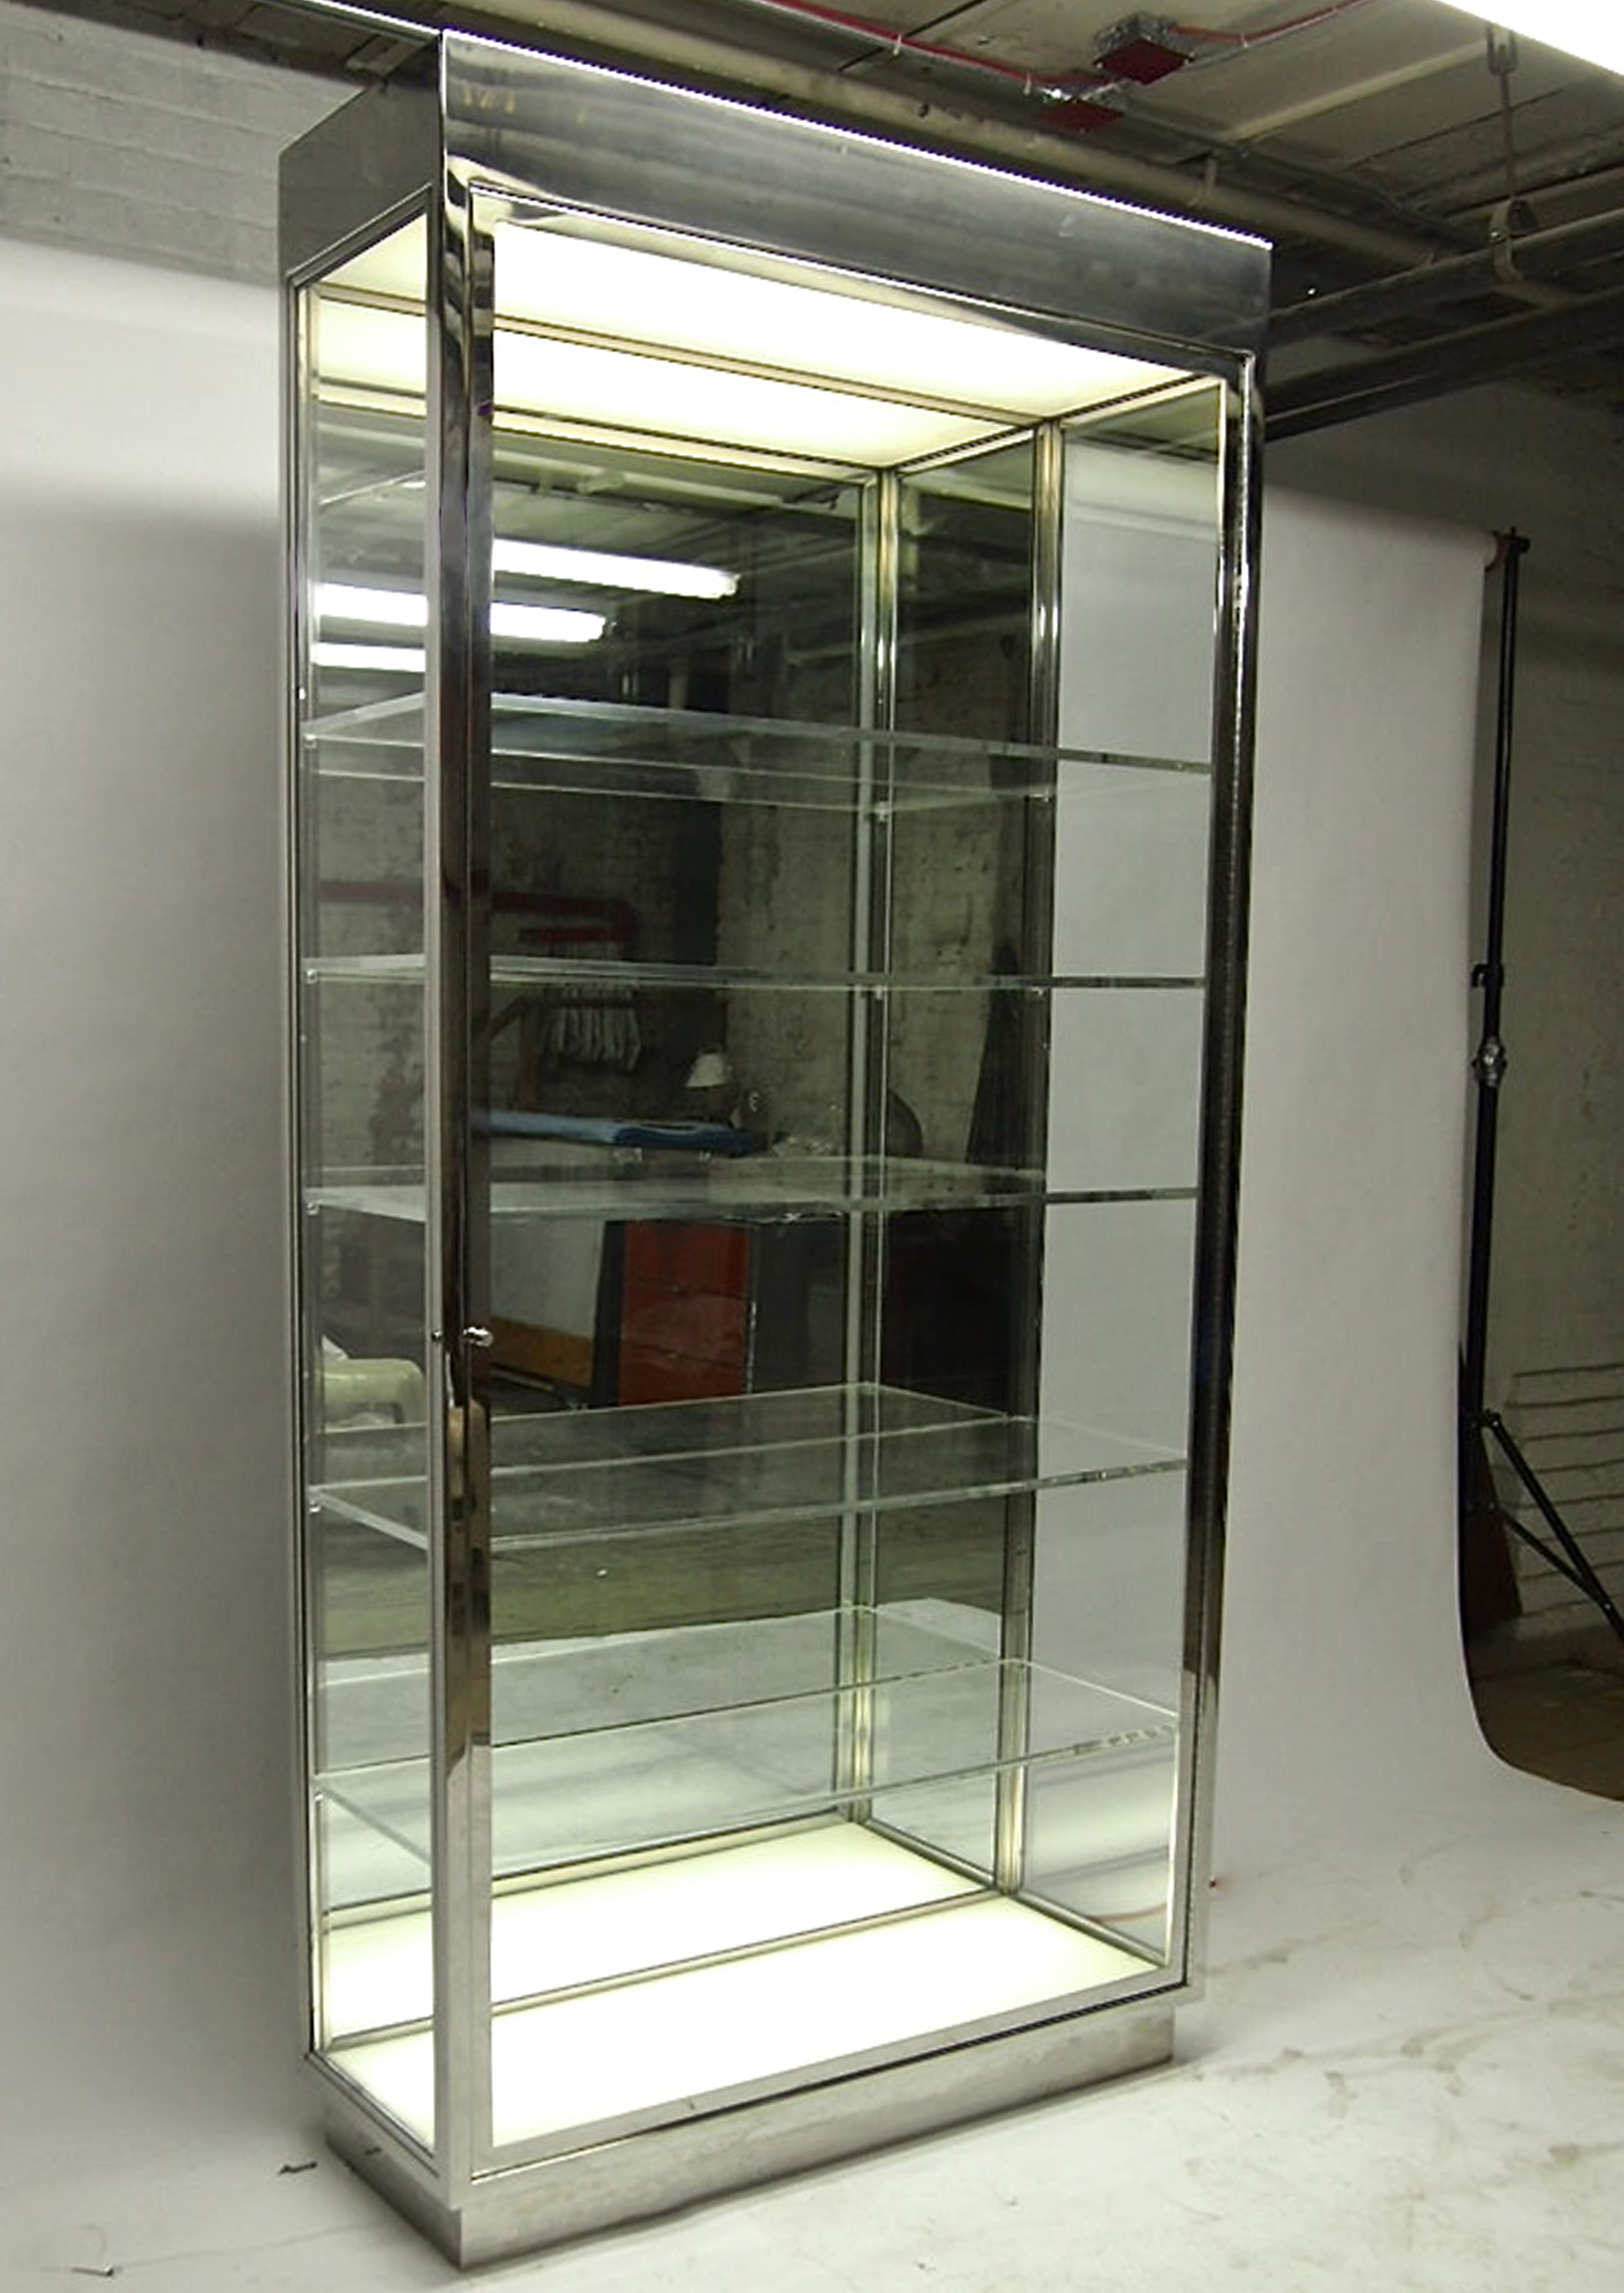 Display Case with Interior Lights by Pace Circa 1975 American